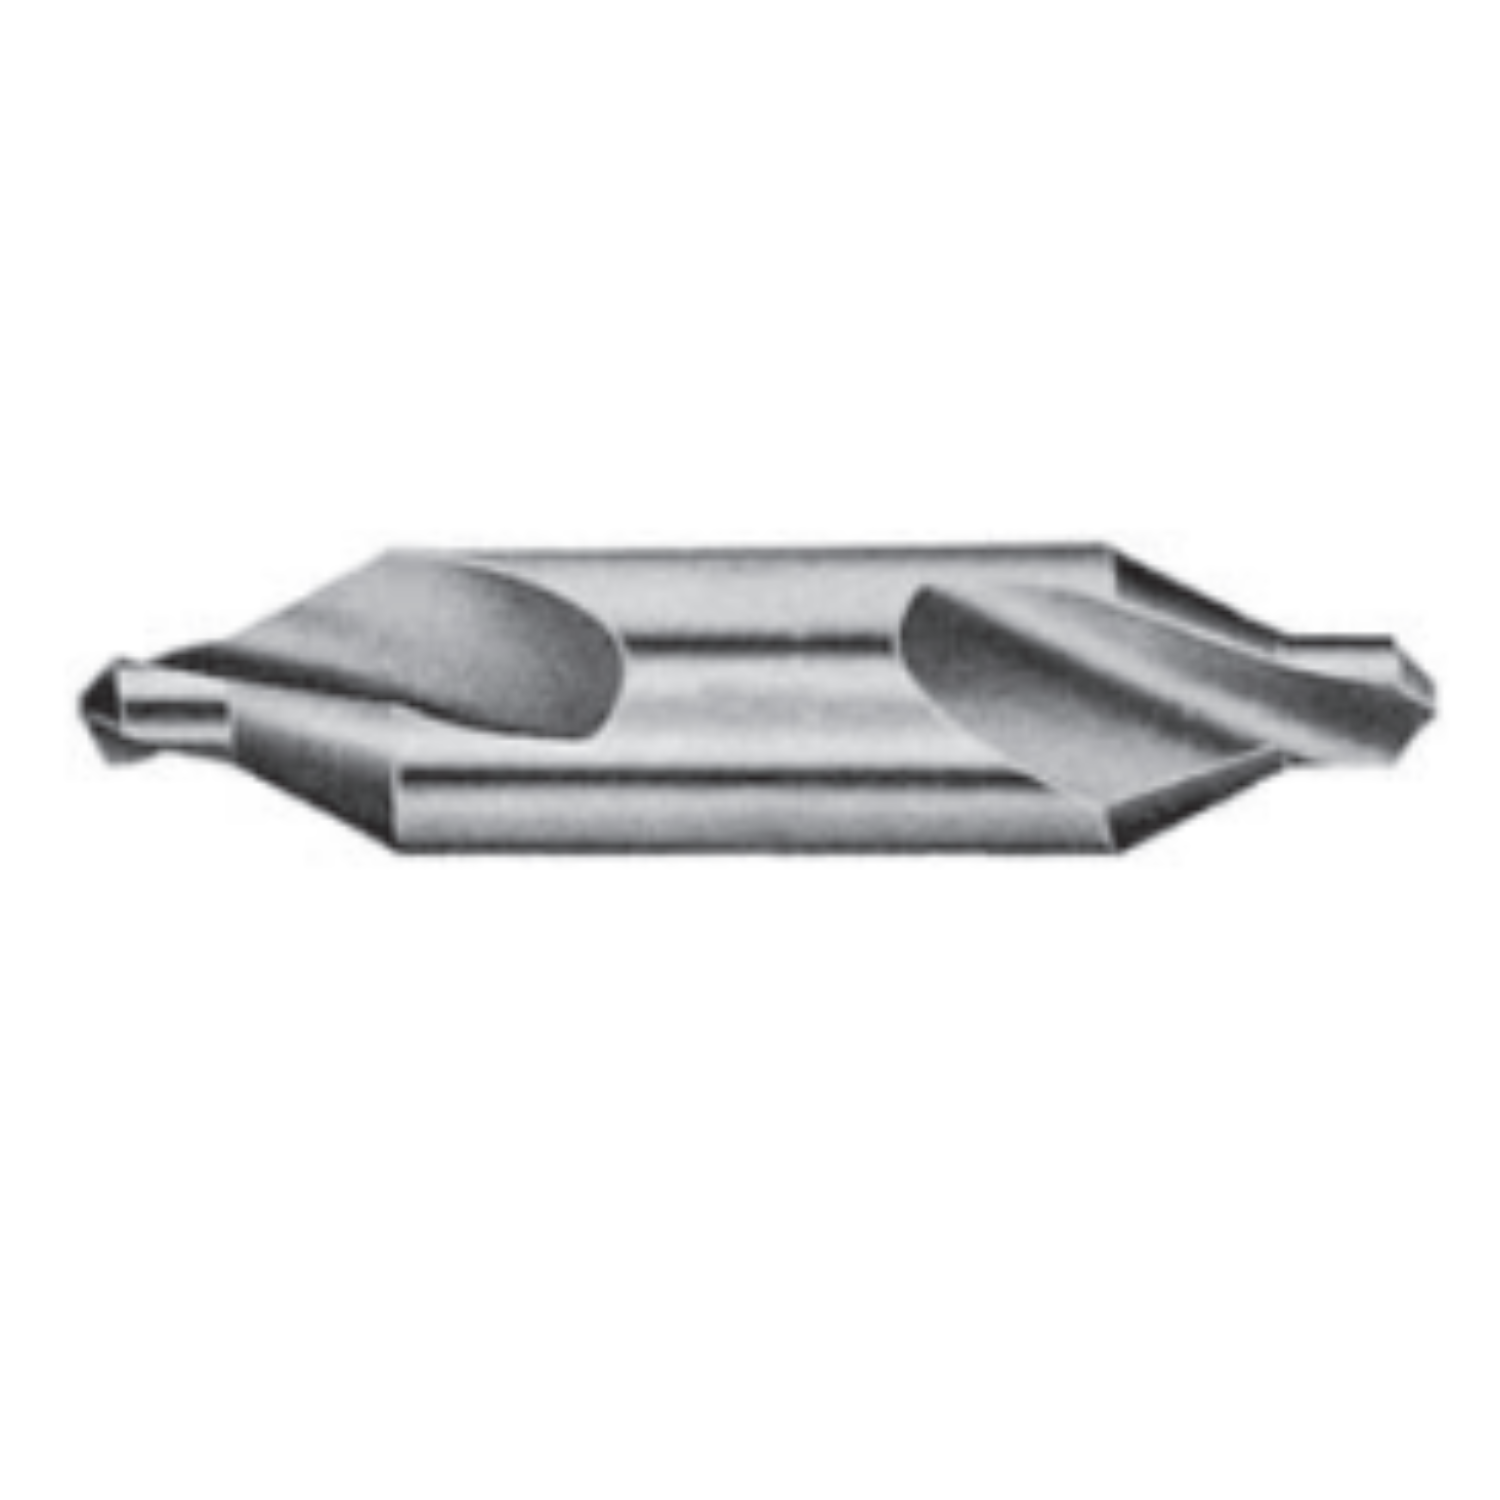 YEW AIK High Speed Centre Drill Type A (YEW AIK Tools) - Premium High Speed Centre Drill from YEW AIK - Shop now at Yew Aik.